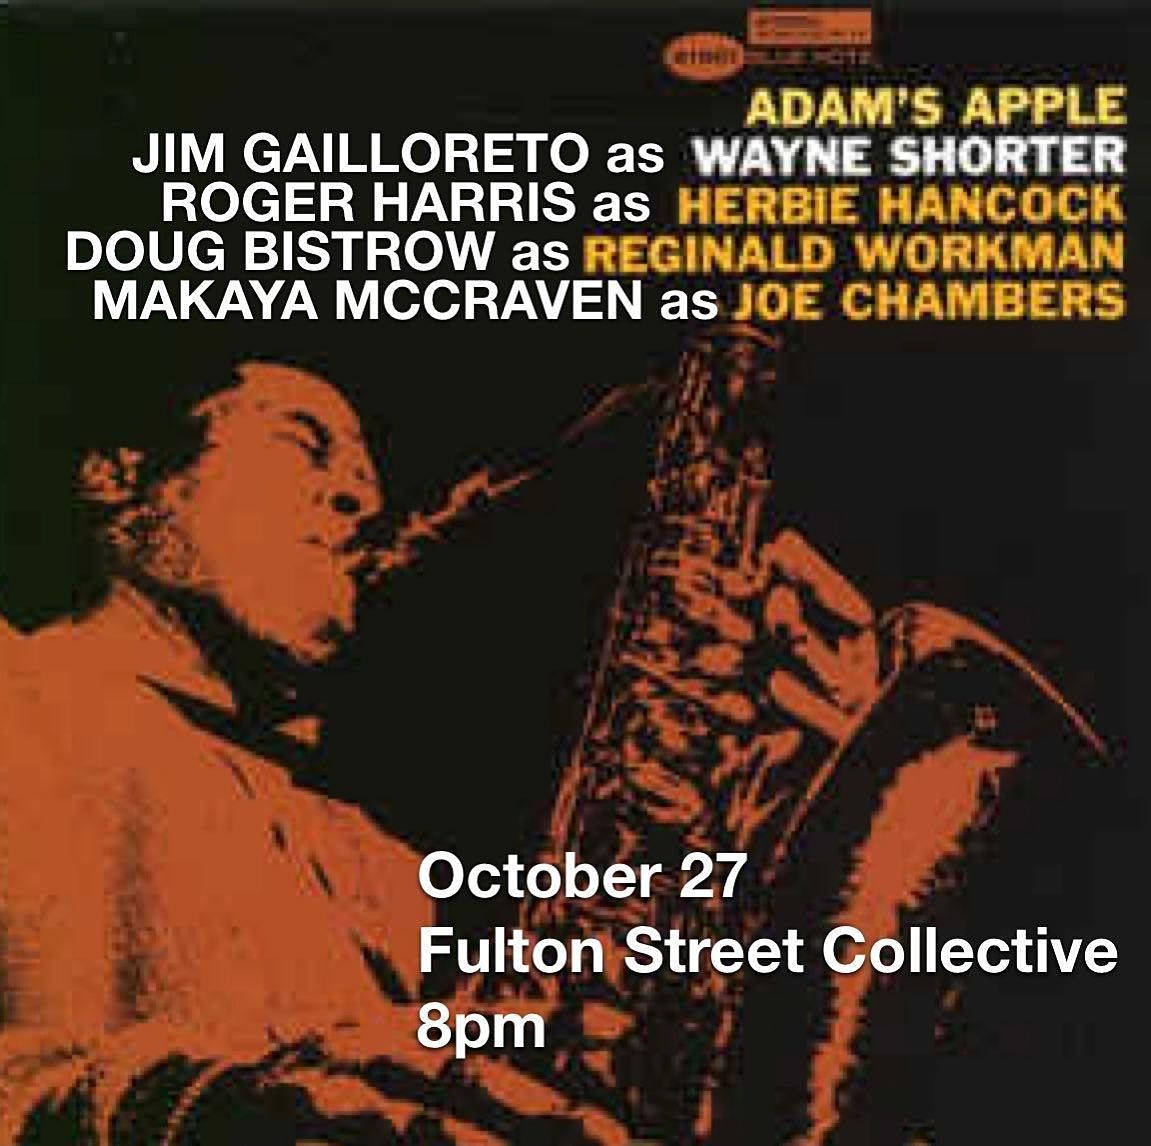 Wayne Shorter's ADAM'S APPLE performed live at Fulton Street Collective